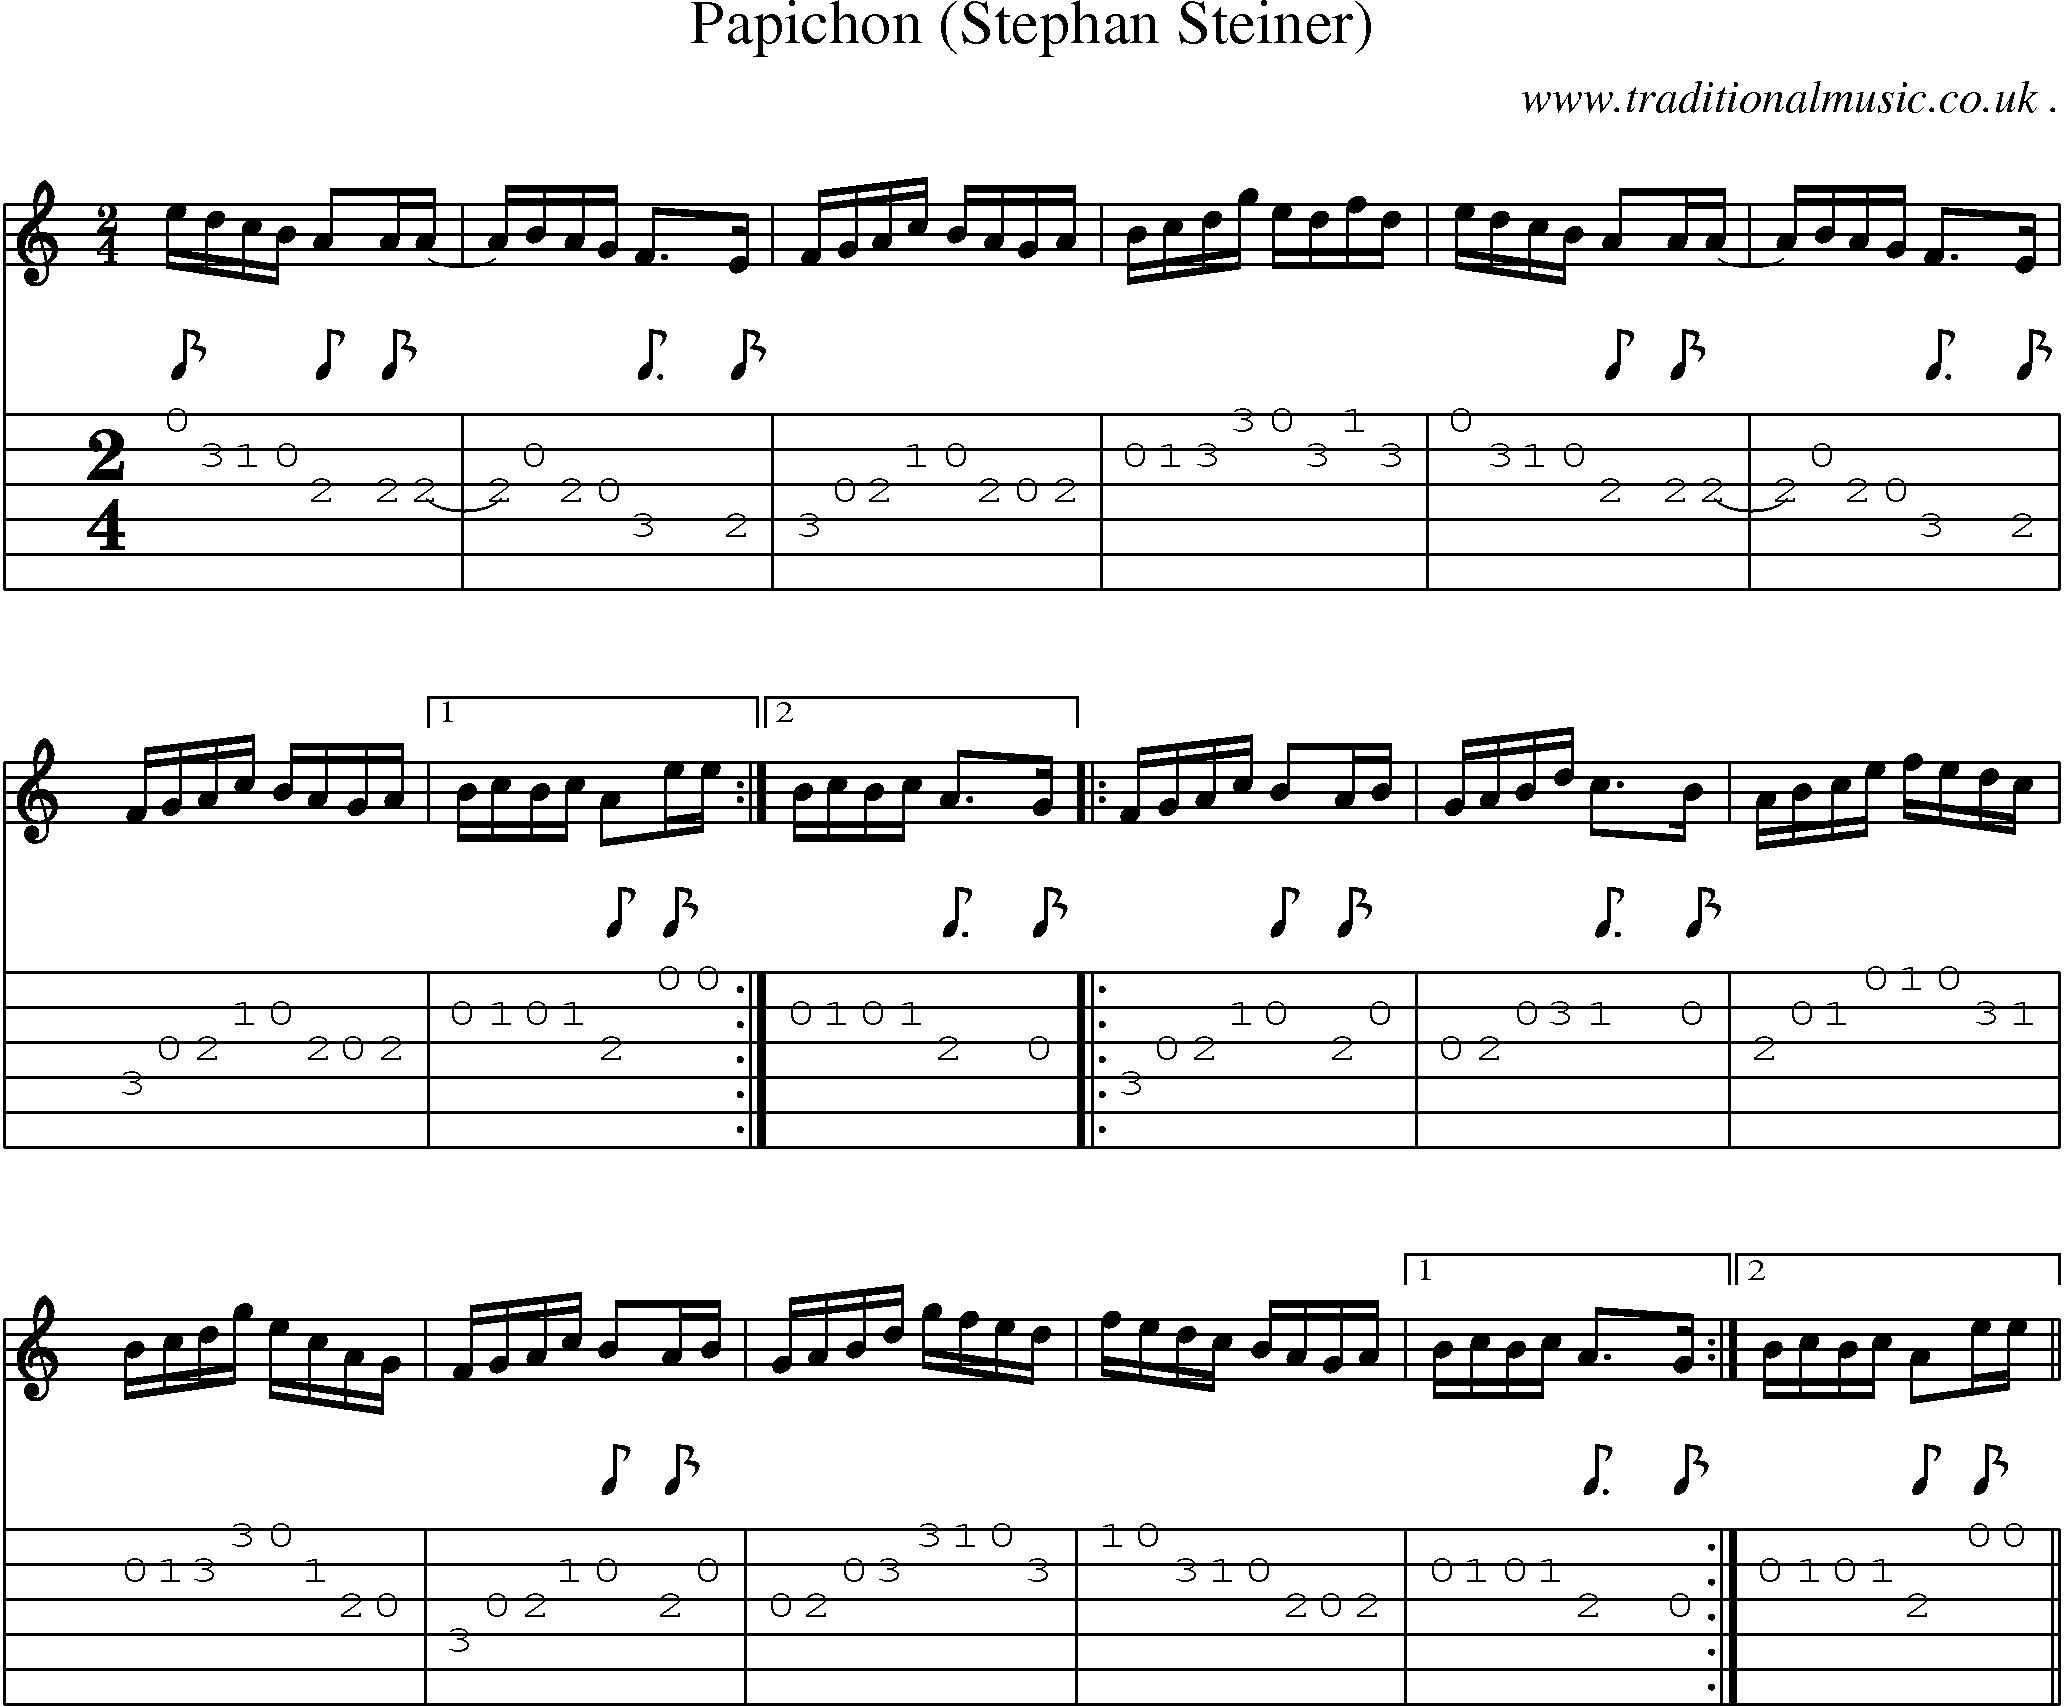 Sheet-Music and Guitar Tabs for Papichon (stephan Steiner)